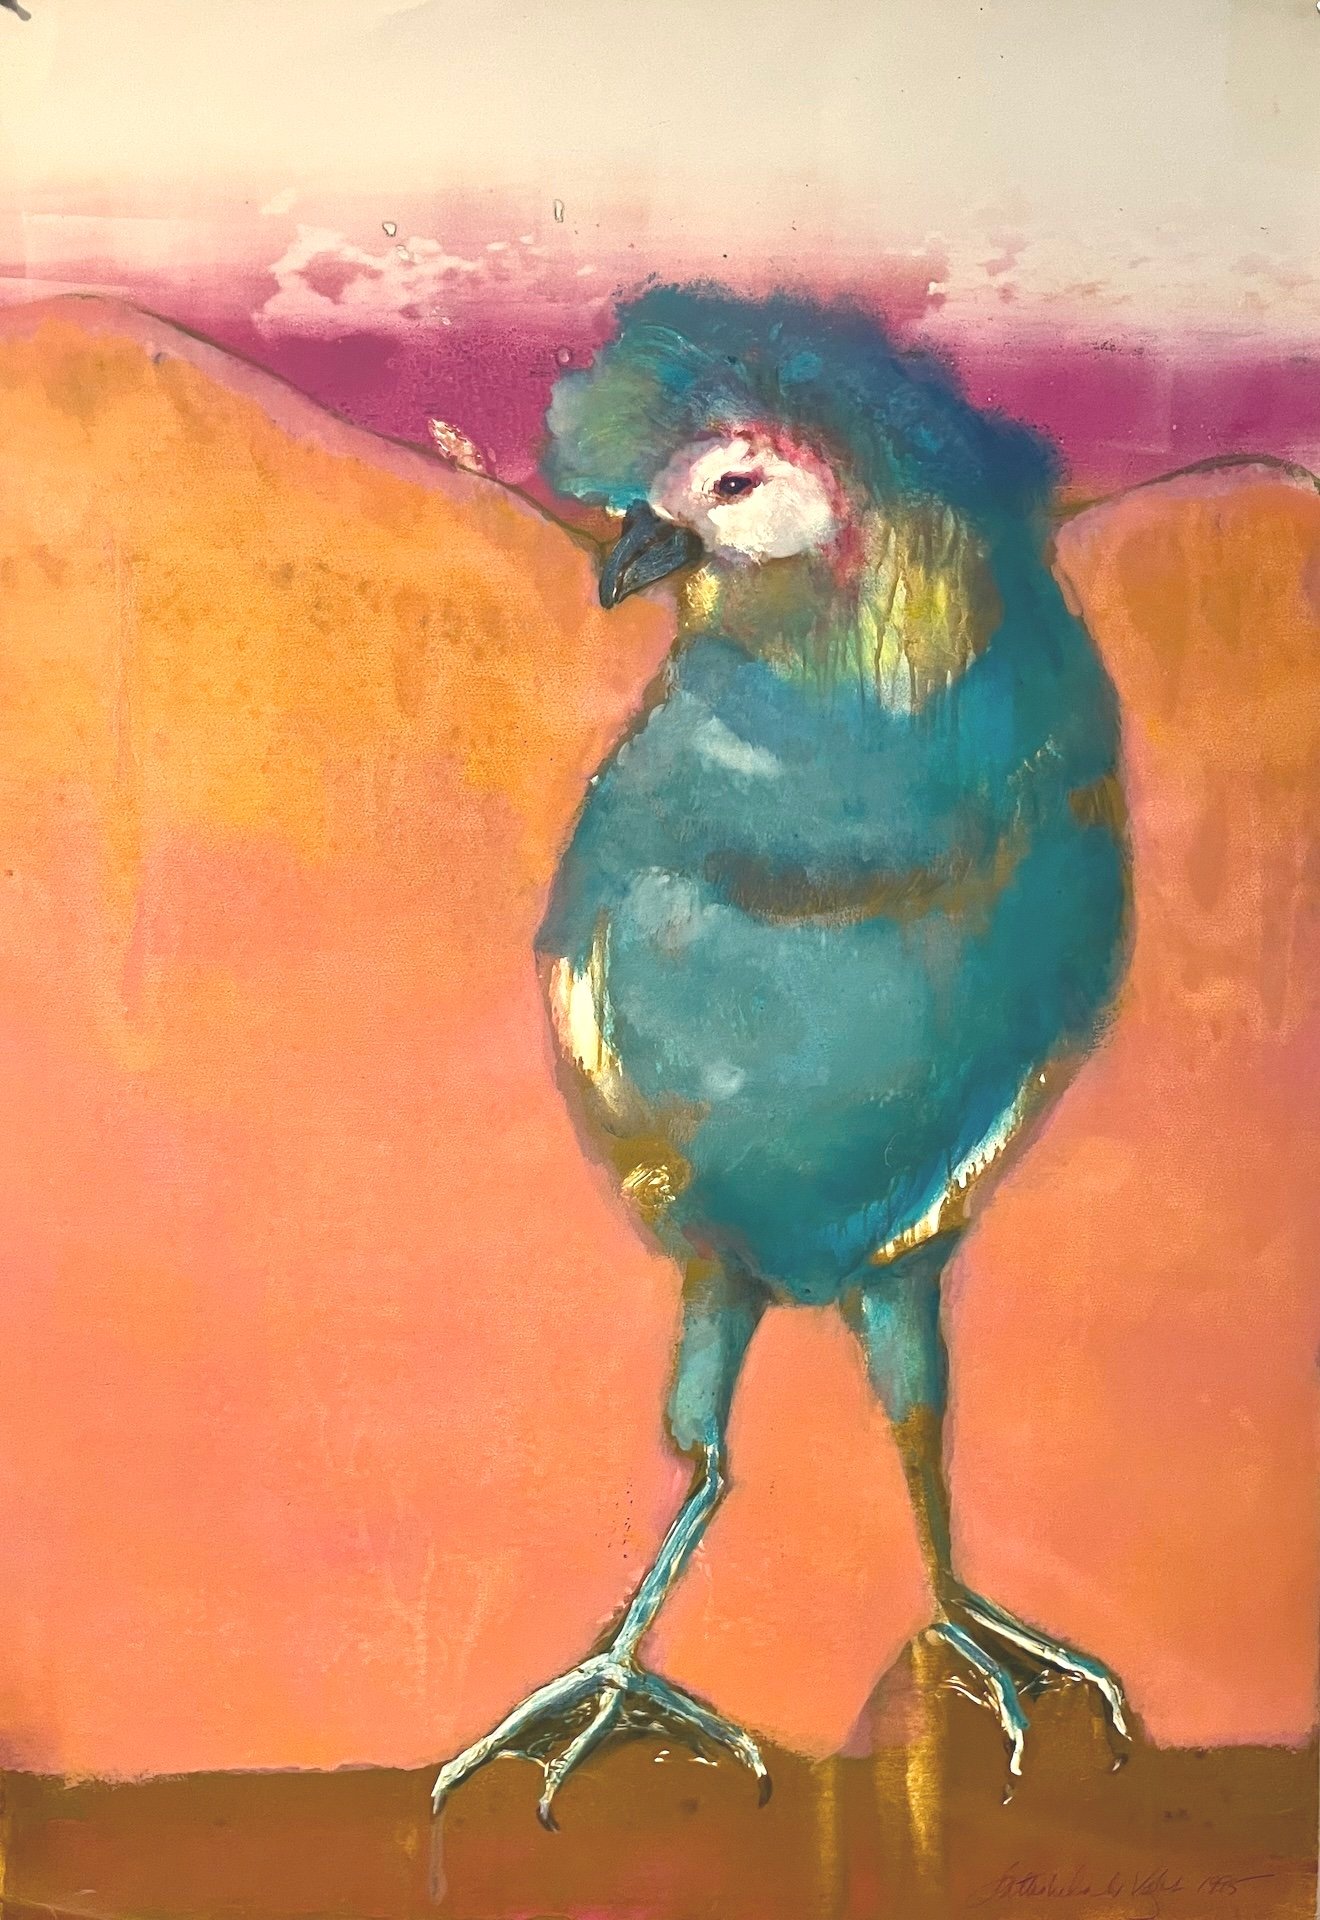 Rooster, Orange, 41" x 29", monotype on paper